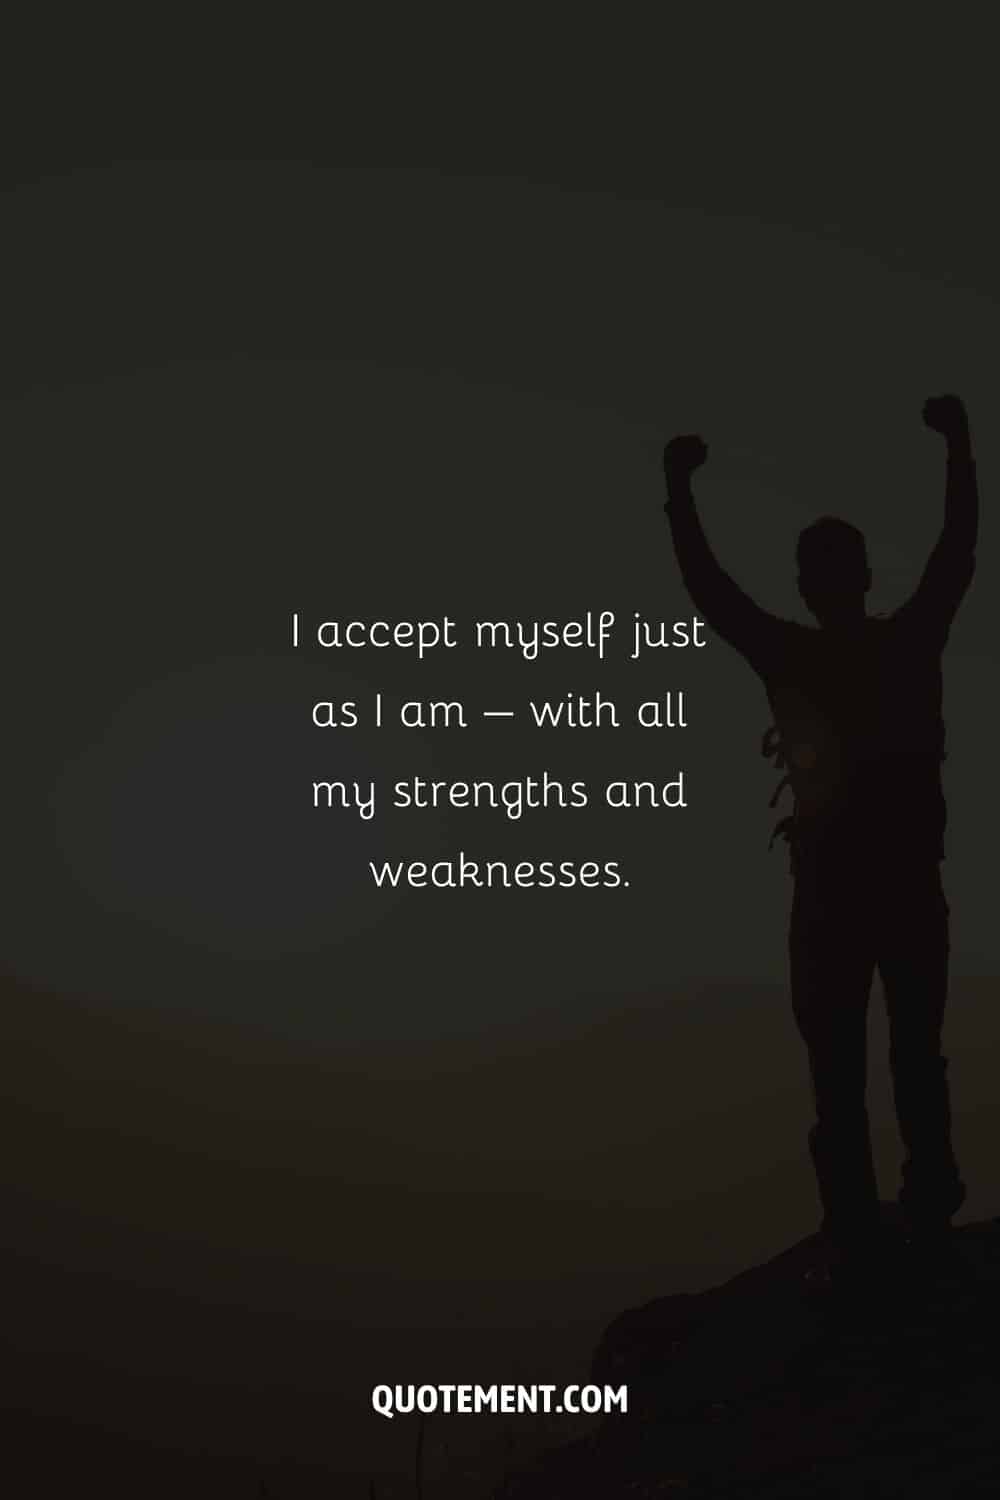 Photograph of a person with the arms up representing an acceptance affirmation.
